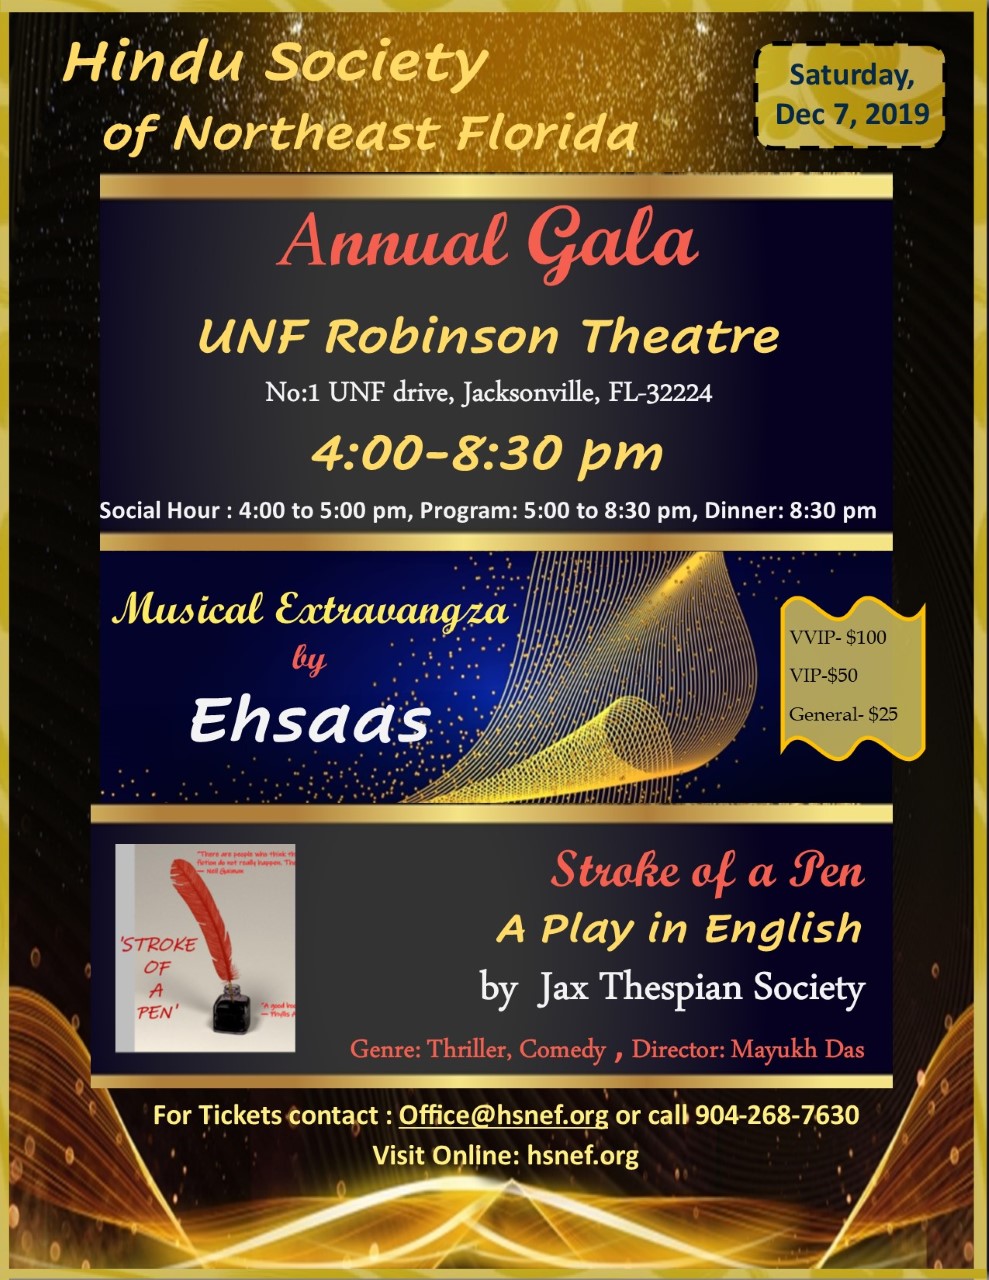 ANNUAL BANQUET GALA 2019 HSNEF SAt Dec 3 - Buy Tickets Online here. For a Blast from the Past! Saturday December 2 2017